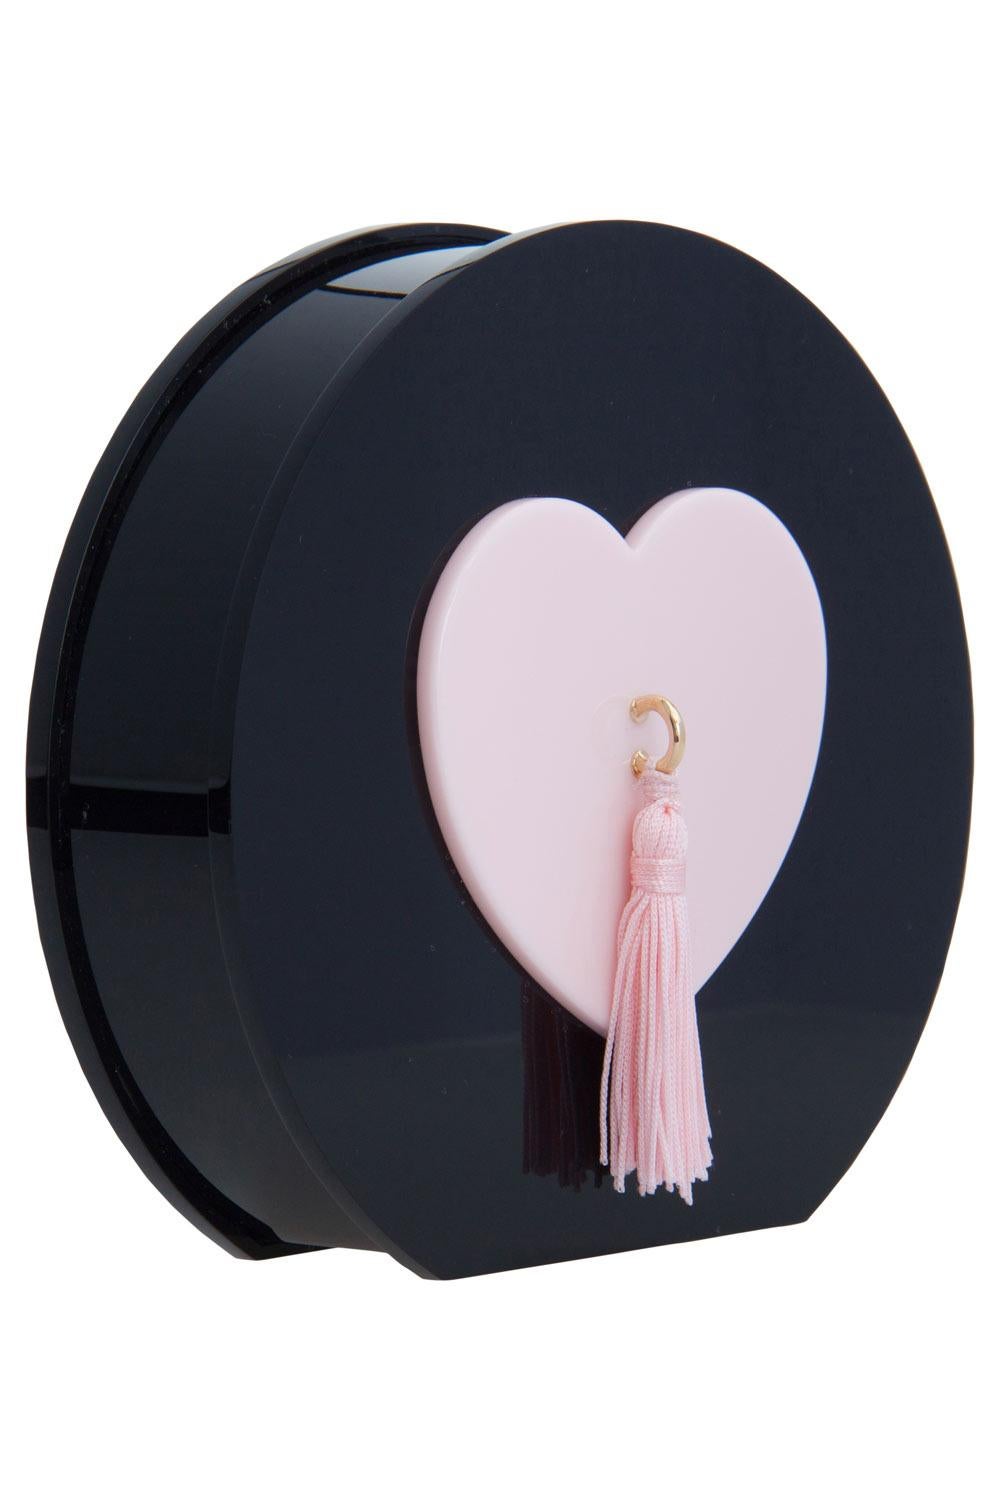 Charlotte Olympia Black/Pink Perspex Such a Tease Tassel Clutch 1